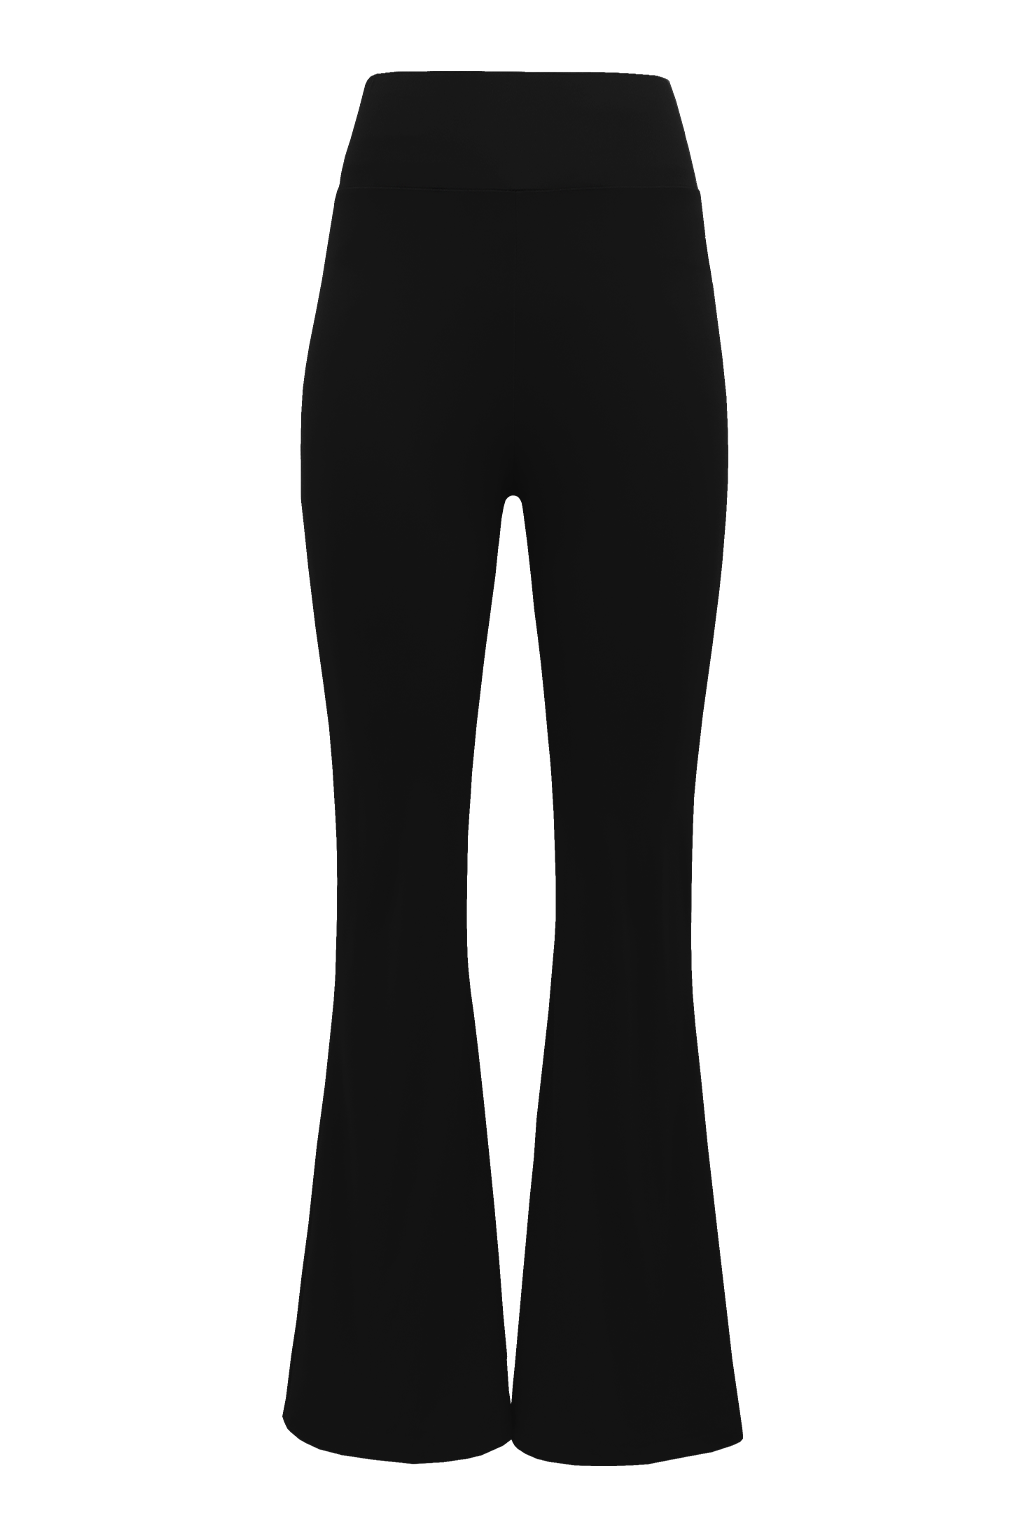 [Napping] Fluffy Glamour Bootcut Black